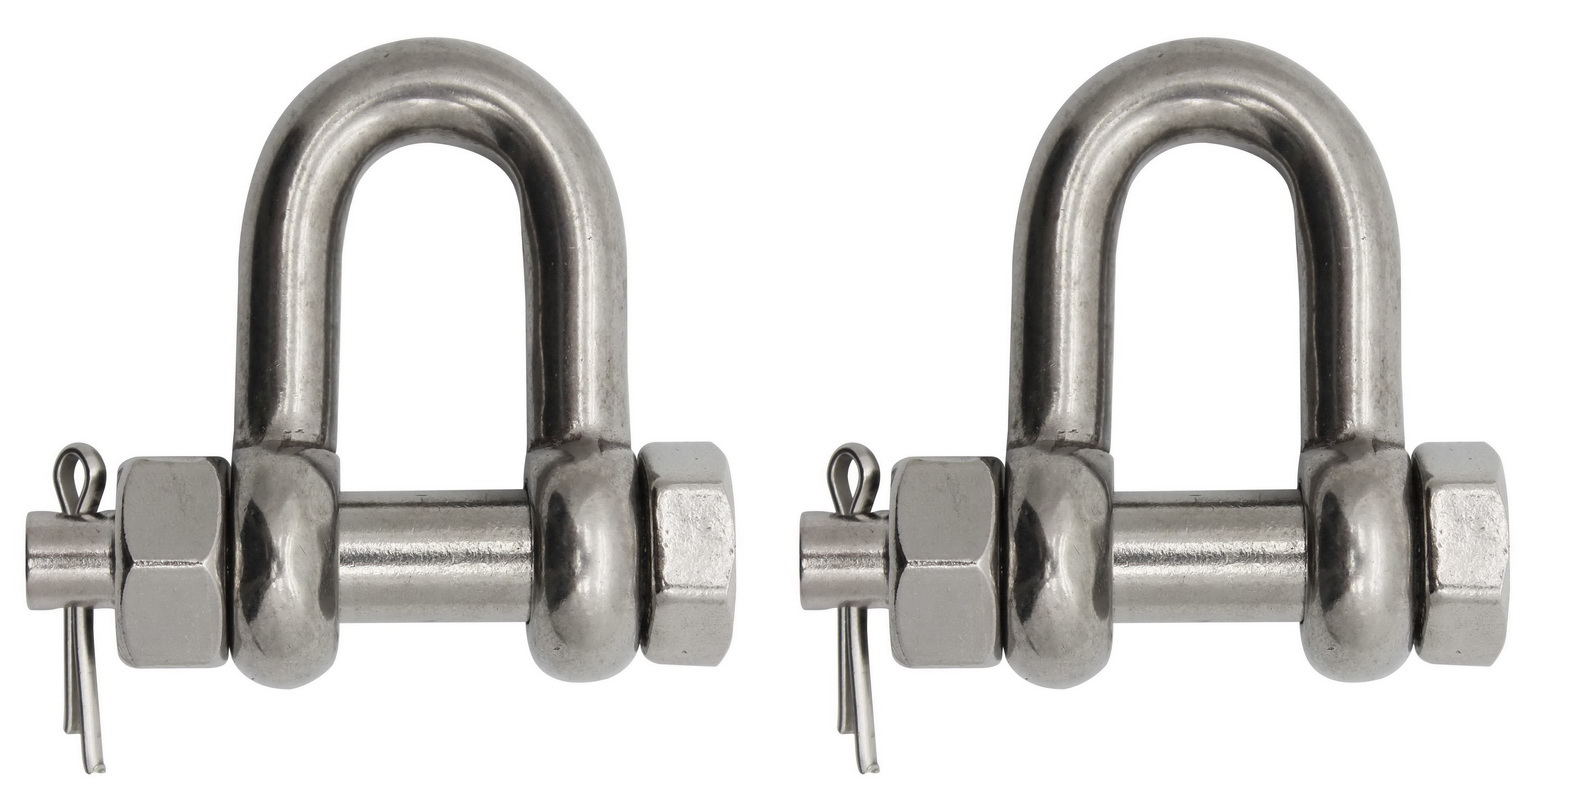 Extreme Max 3006.8378.4 BoatTector Stainless Steel Bolt-Type Anchor Shackle 1/2 4-Pack 